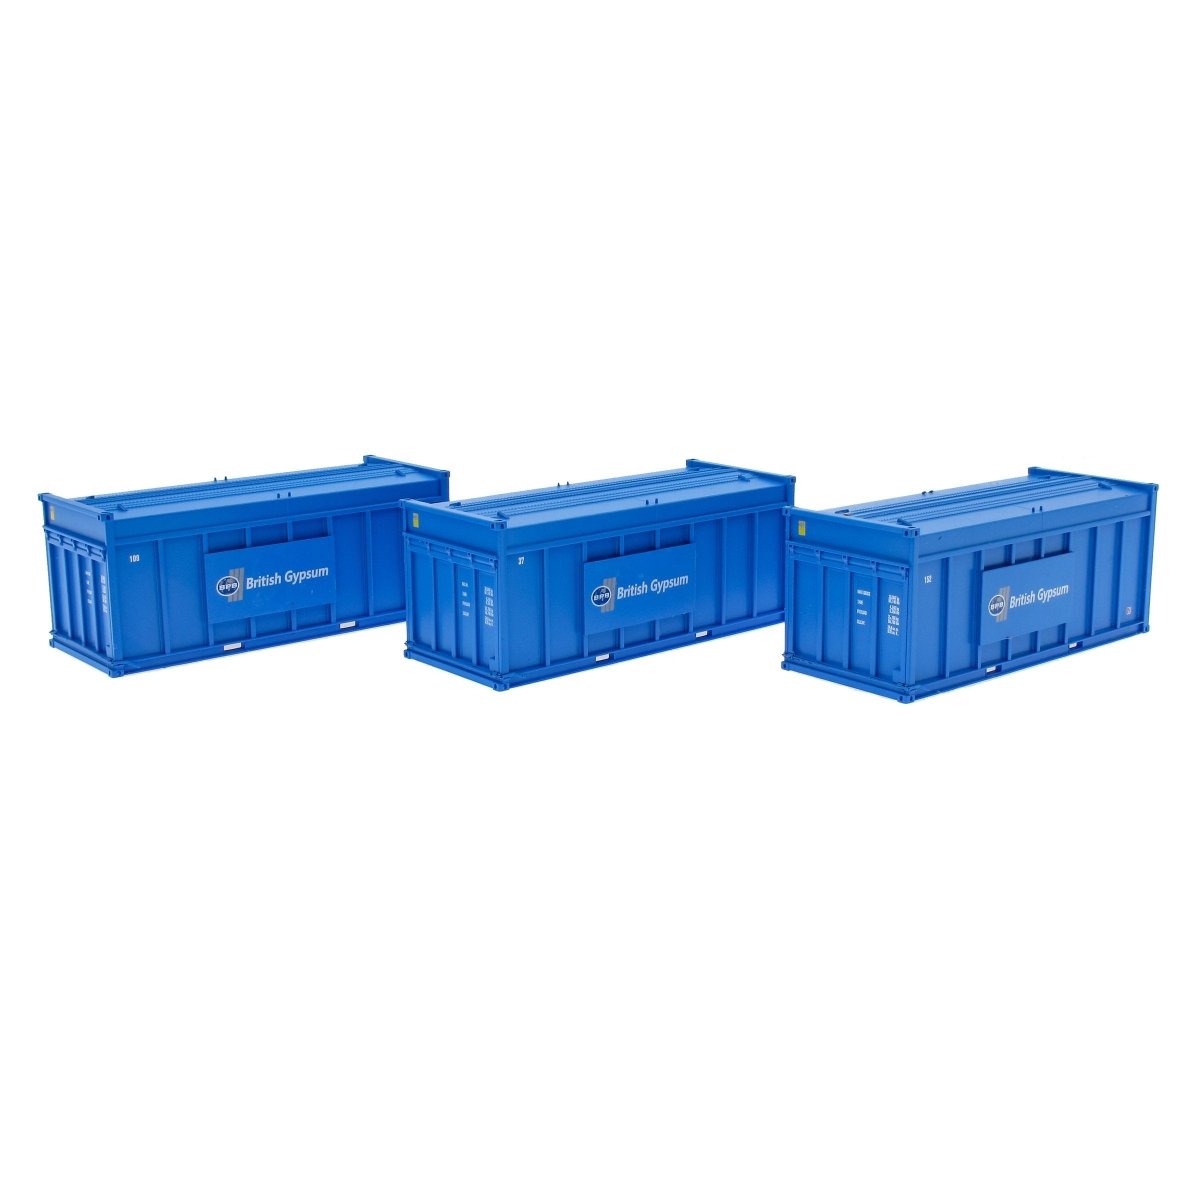 Accurascale Pack of 3 Gypsum 20' Containers - Blue Containers - Phillips Hobbies